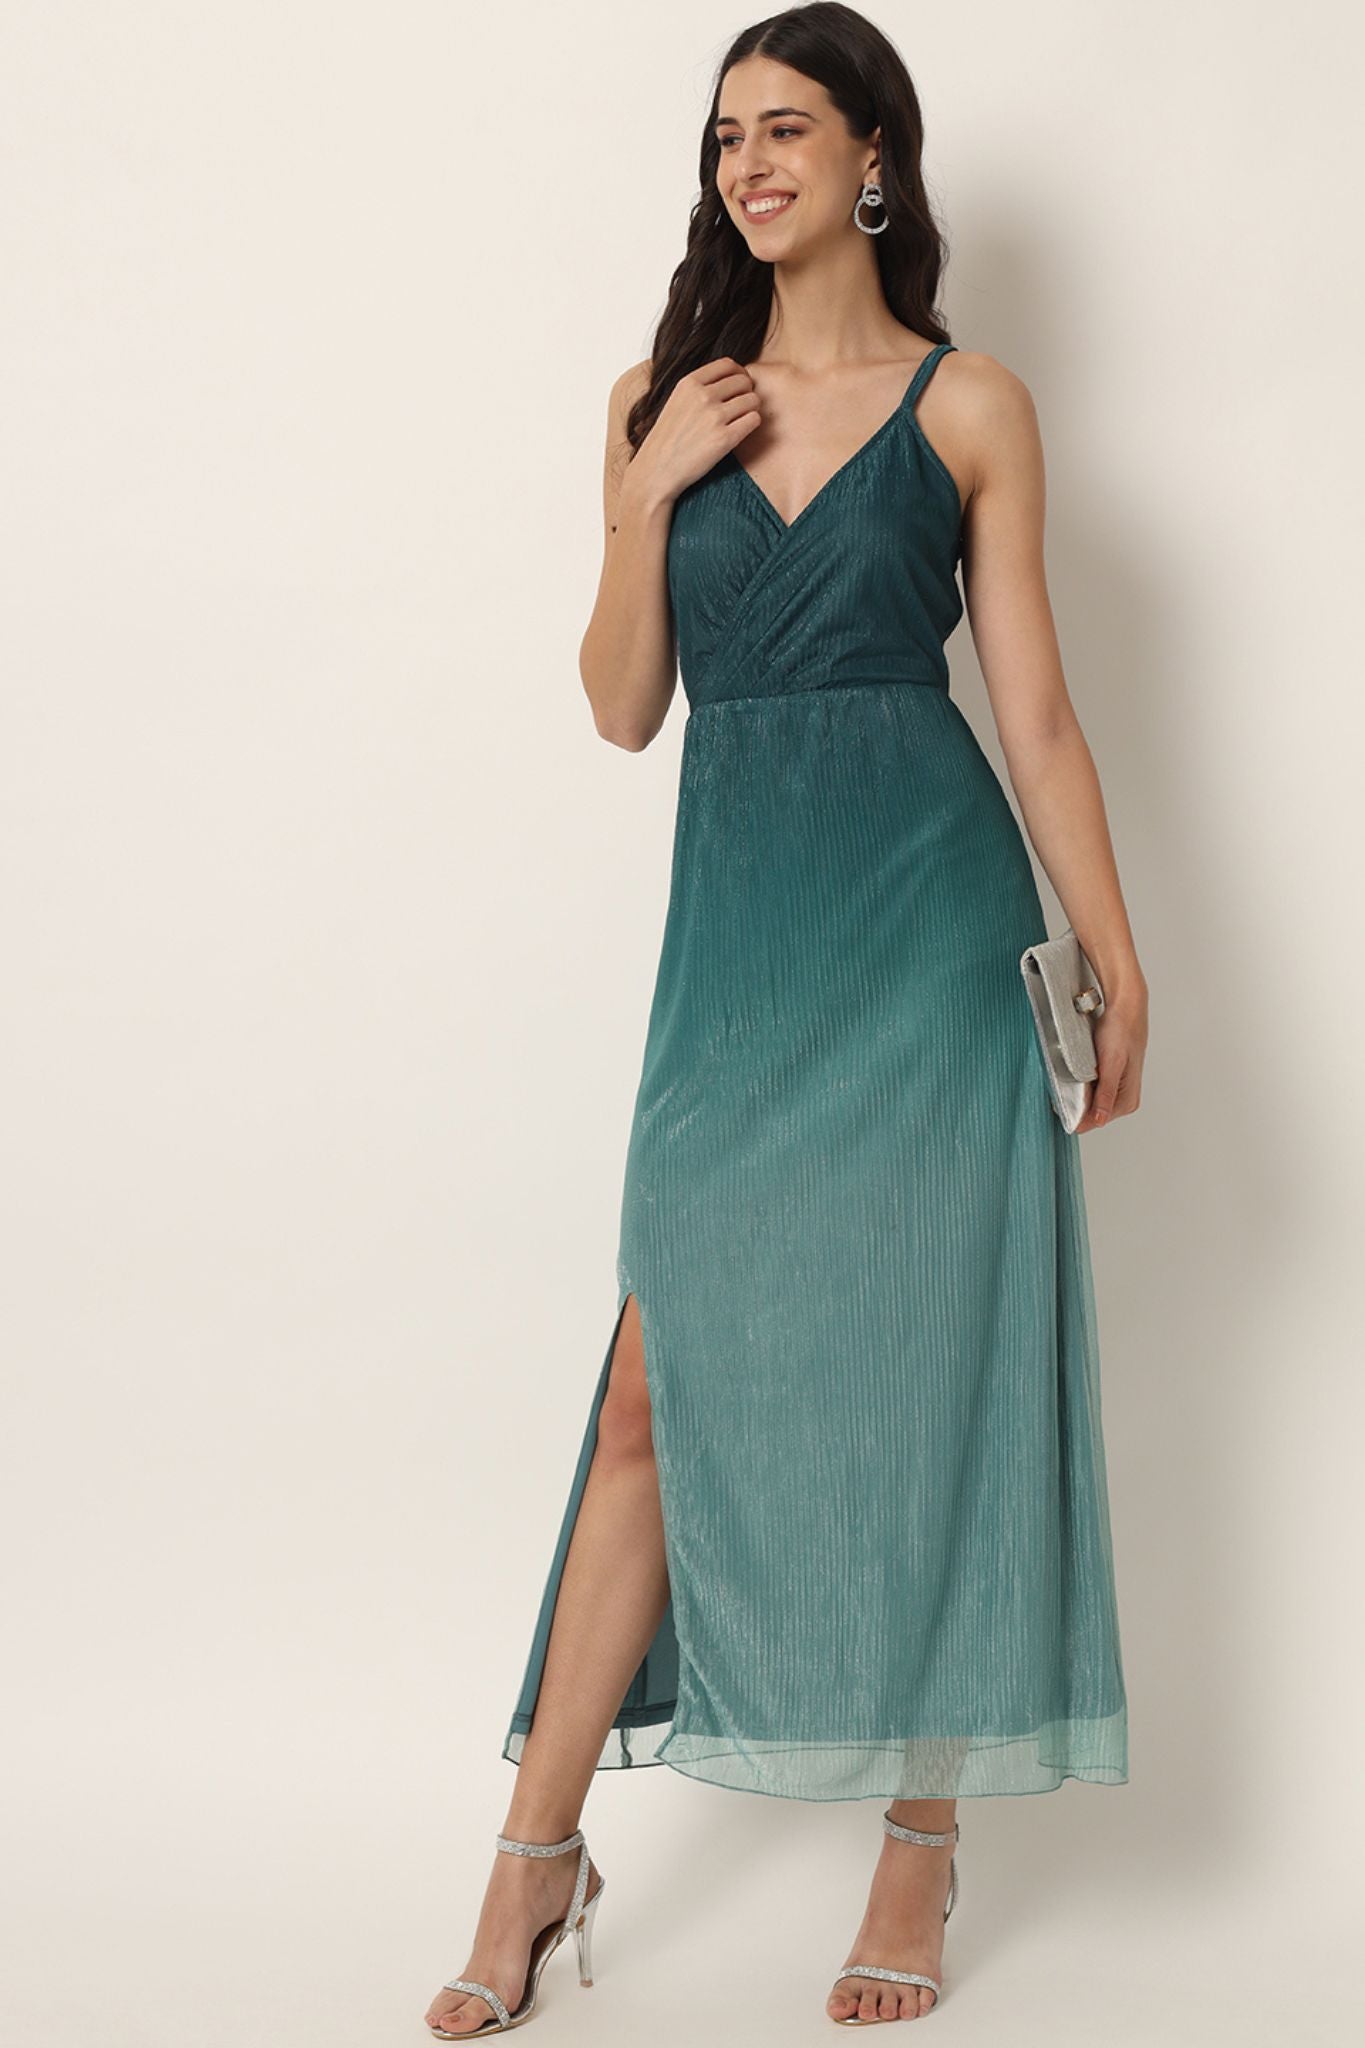 Buy U&F Plus Size Olive Green Crepe Maxi Dress at Amazon.in